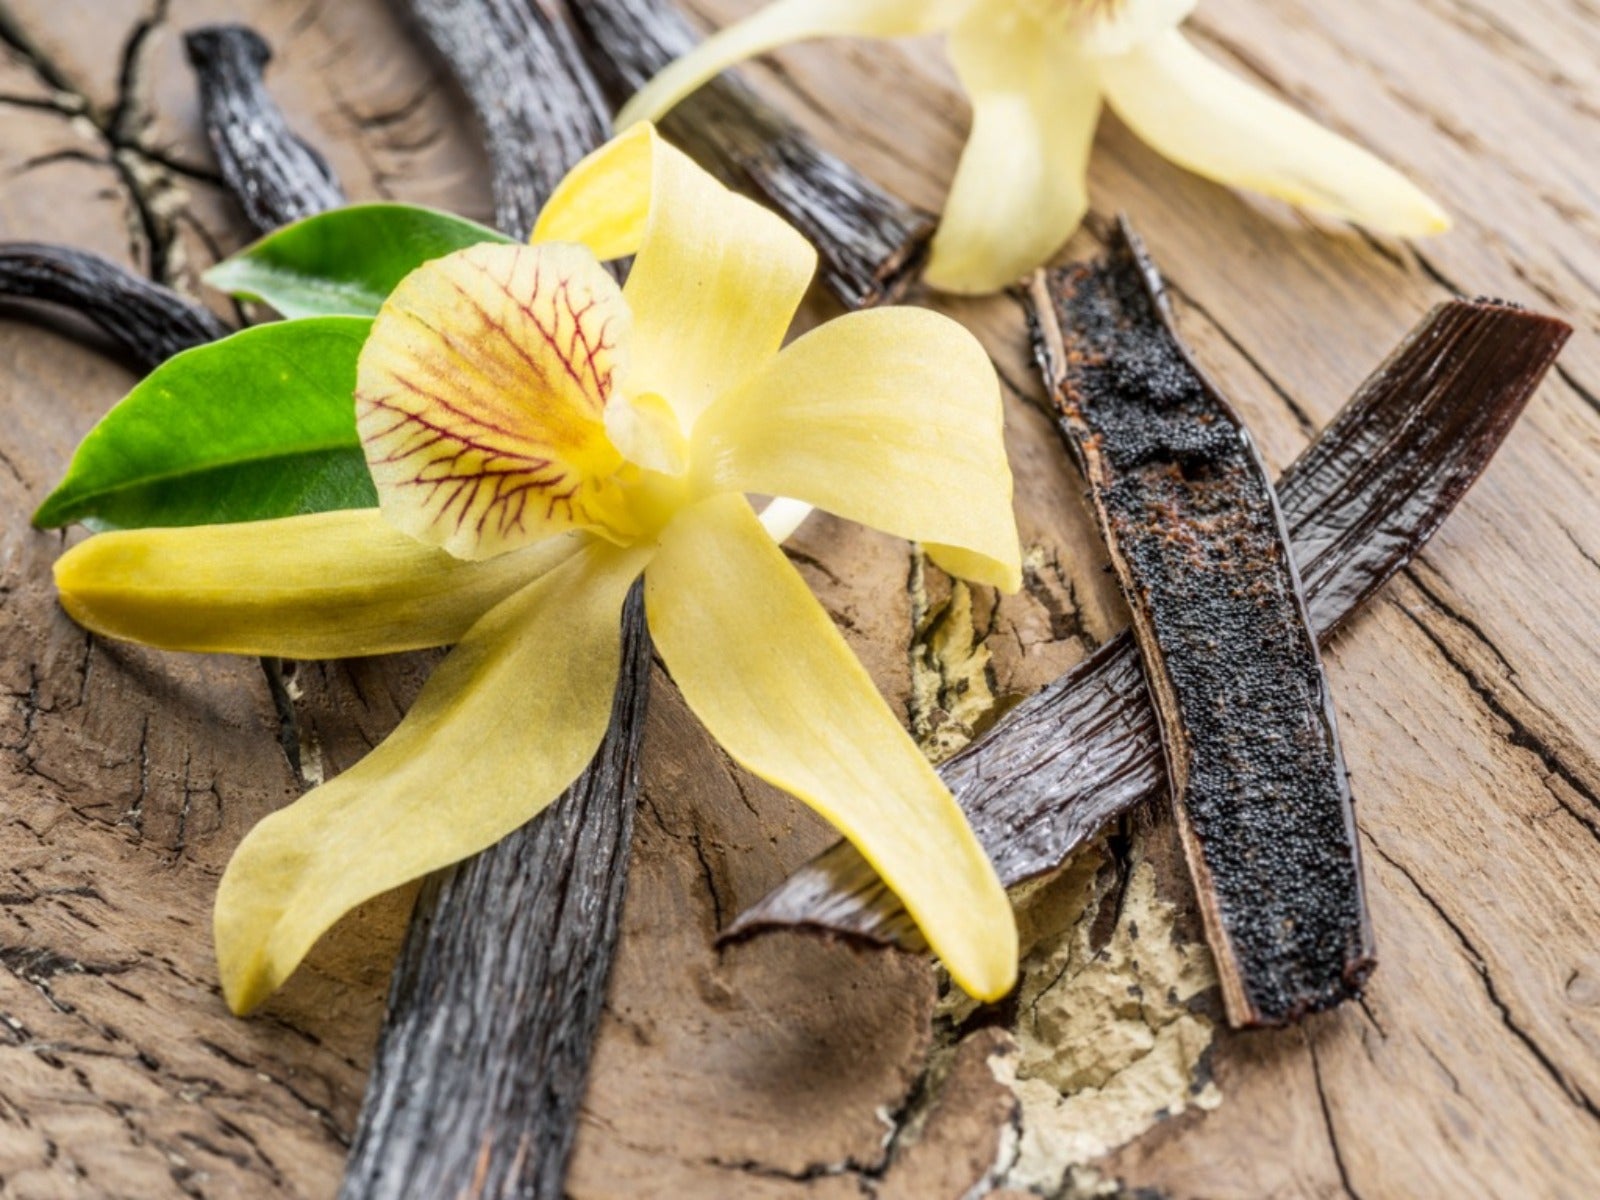 A vanilla orchid and dried vanilla beans